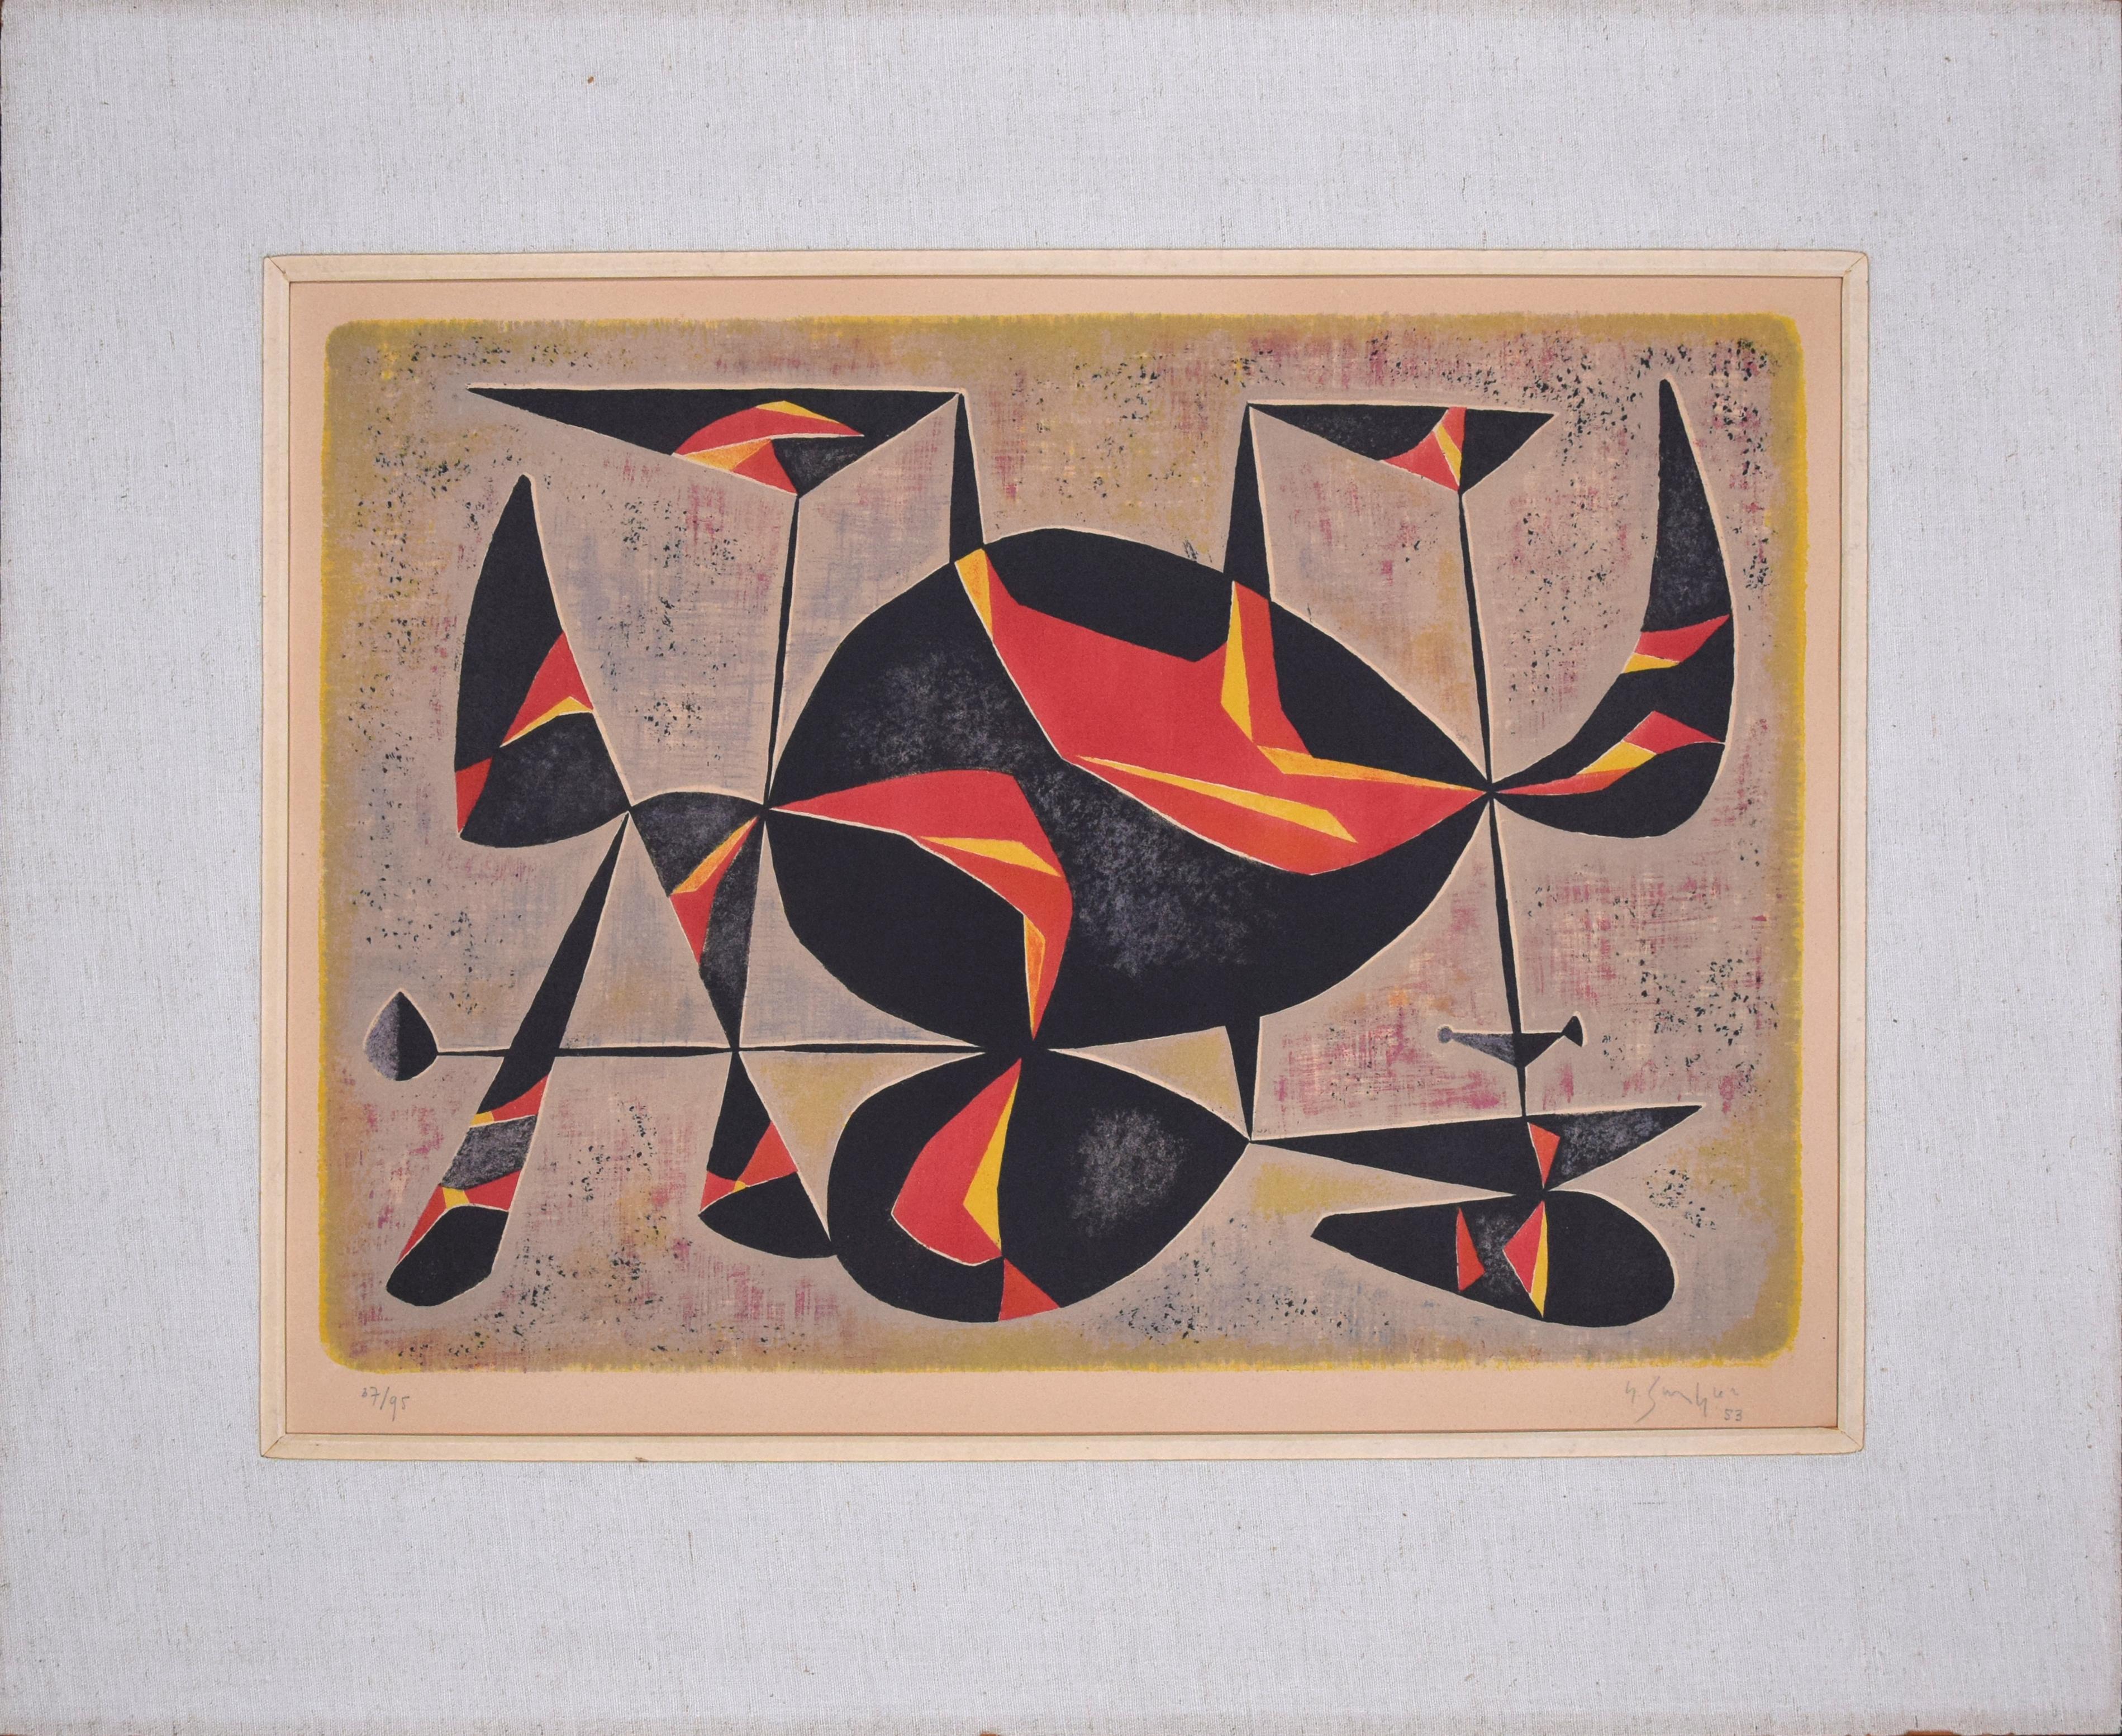 Veronica is is a colored lithograph realized by Gustave Singier in1953.
Hand signed and dated in pencil on lower right. Numbered on lower left. Edition 37/95.
This modern print is realized using black, red and yellow colors. 
The artwork is attached